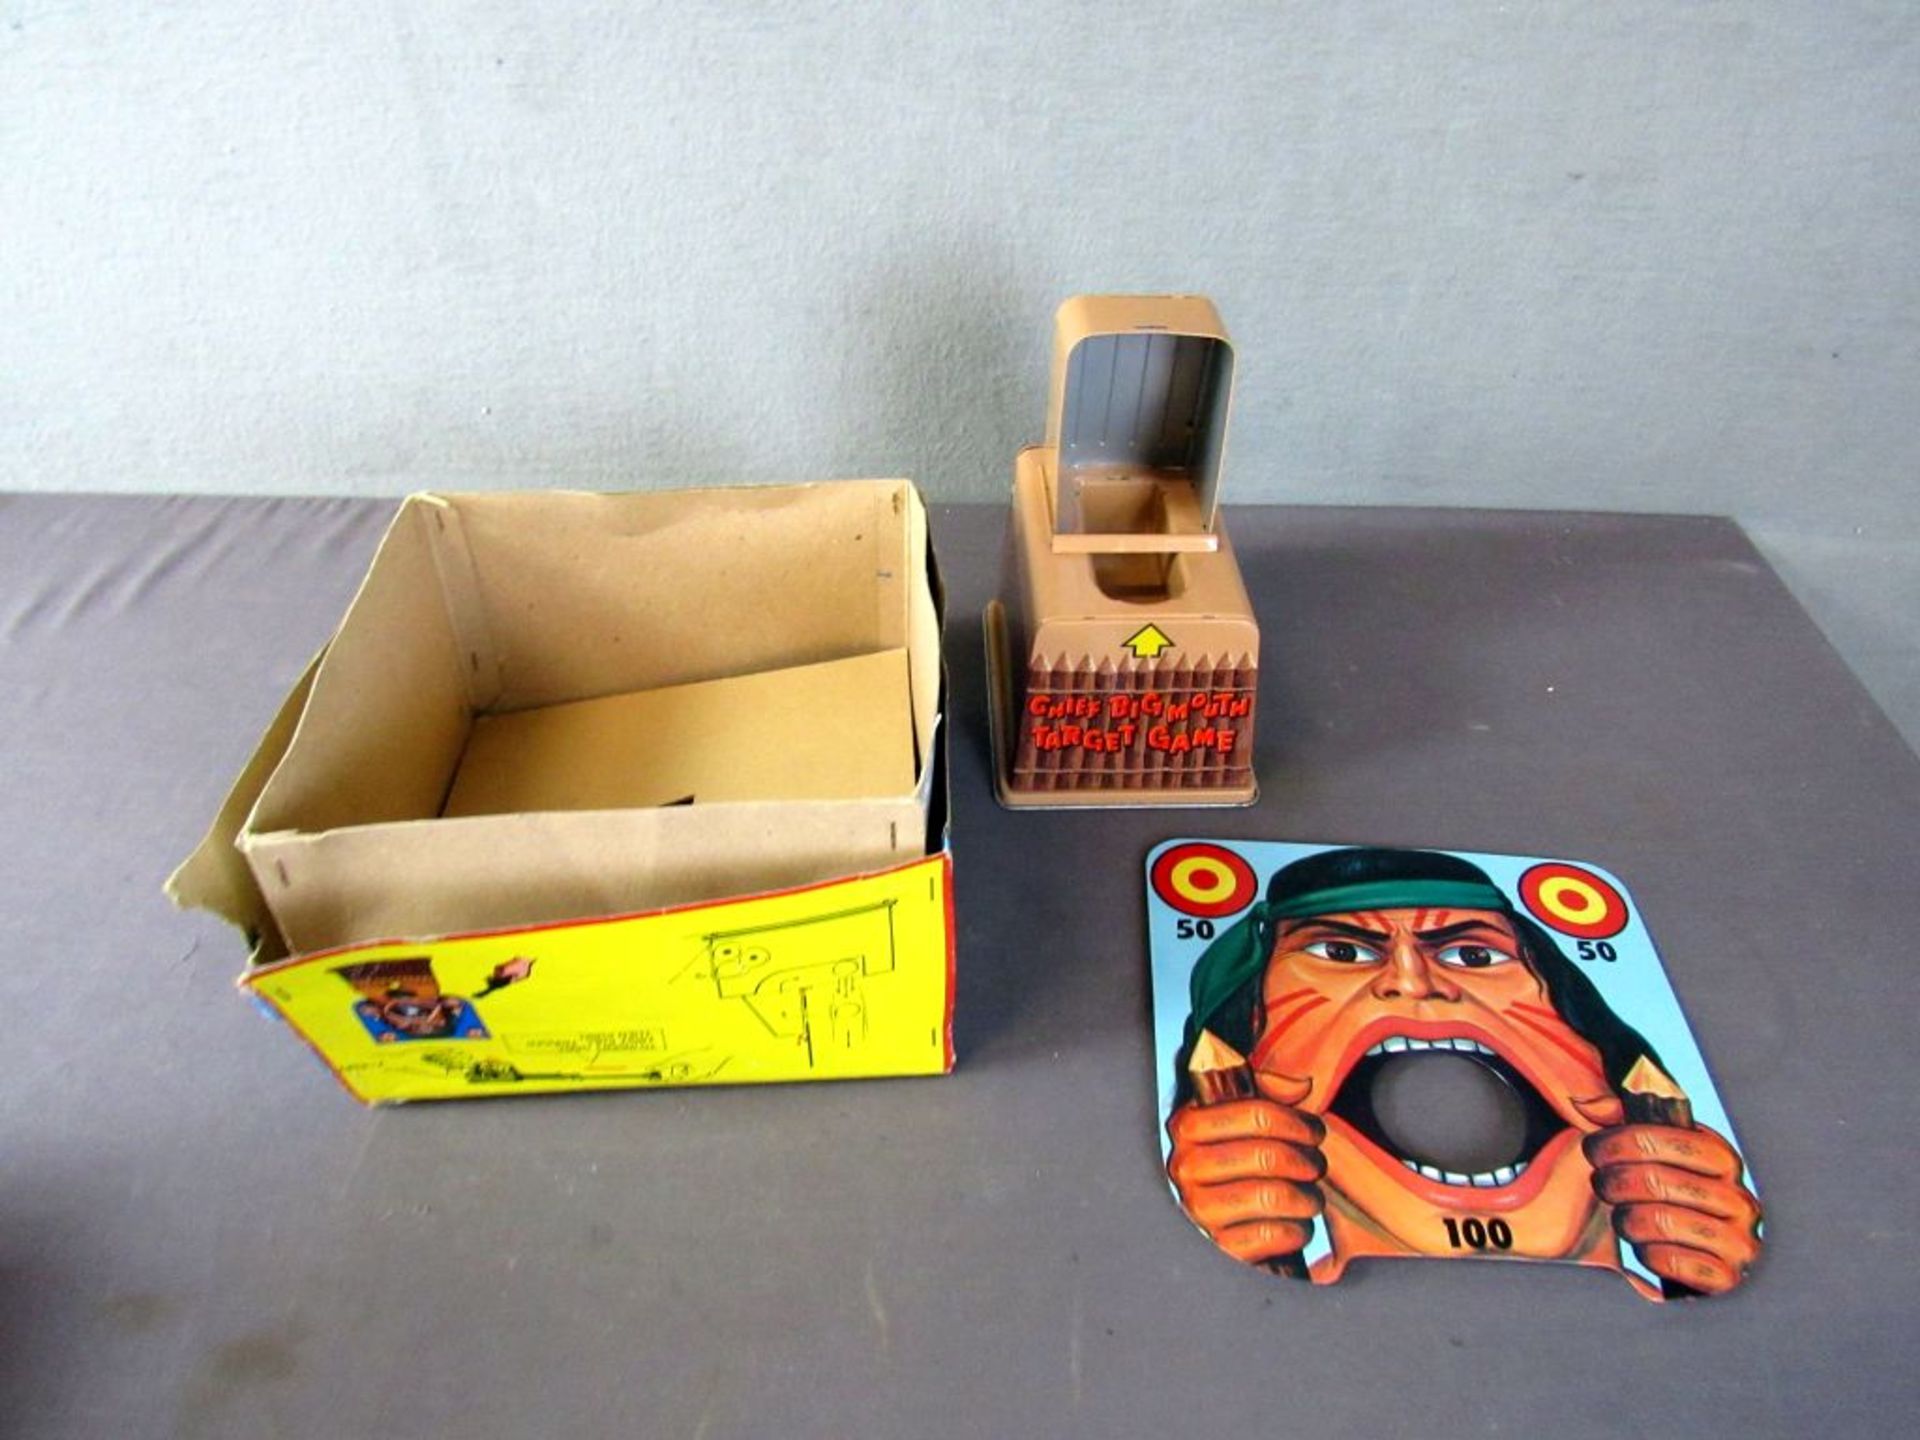 Blechspielzeug Big Mouth Targetgame - Image 6 of 8